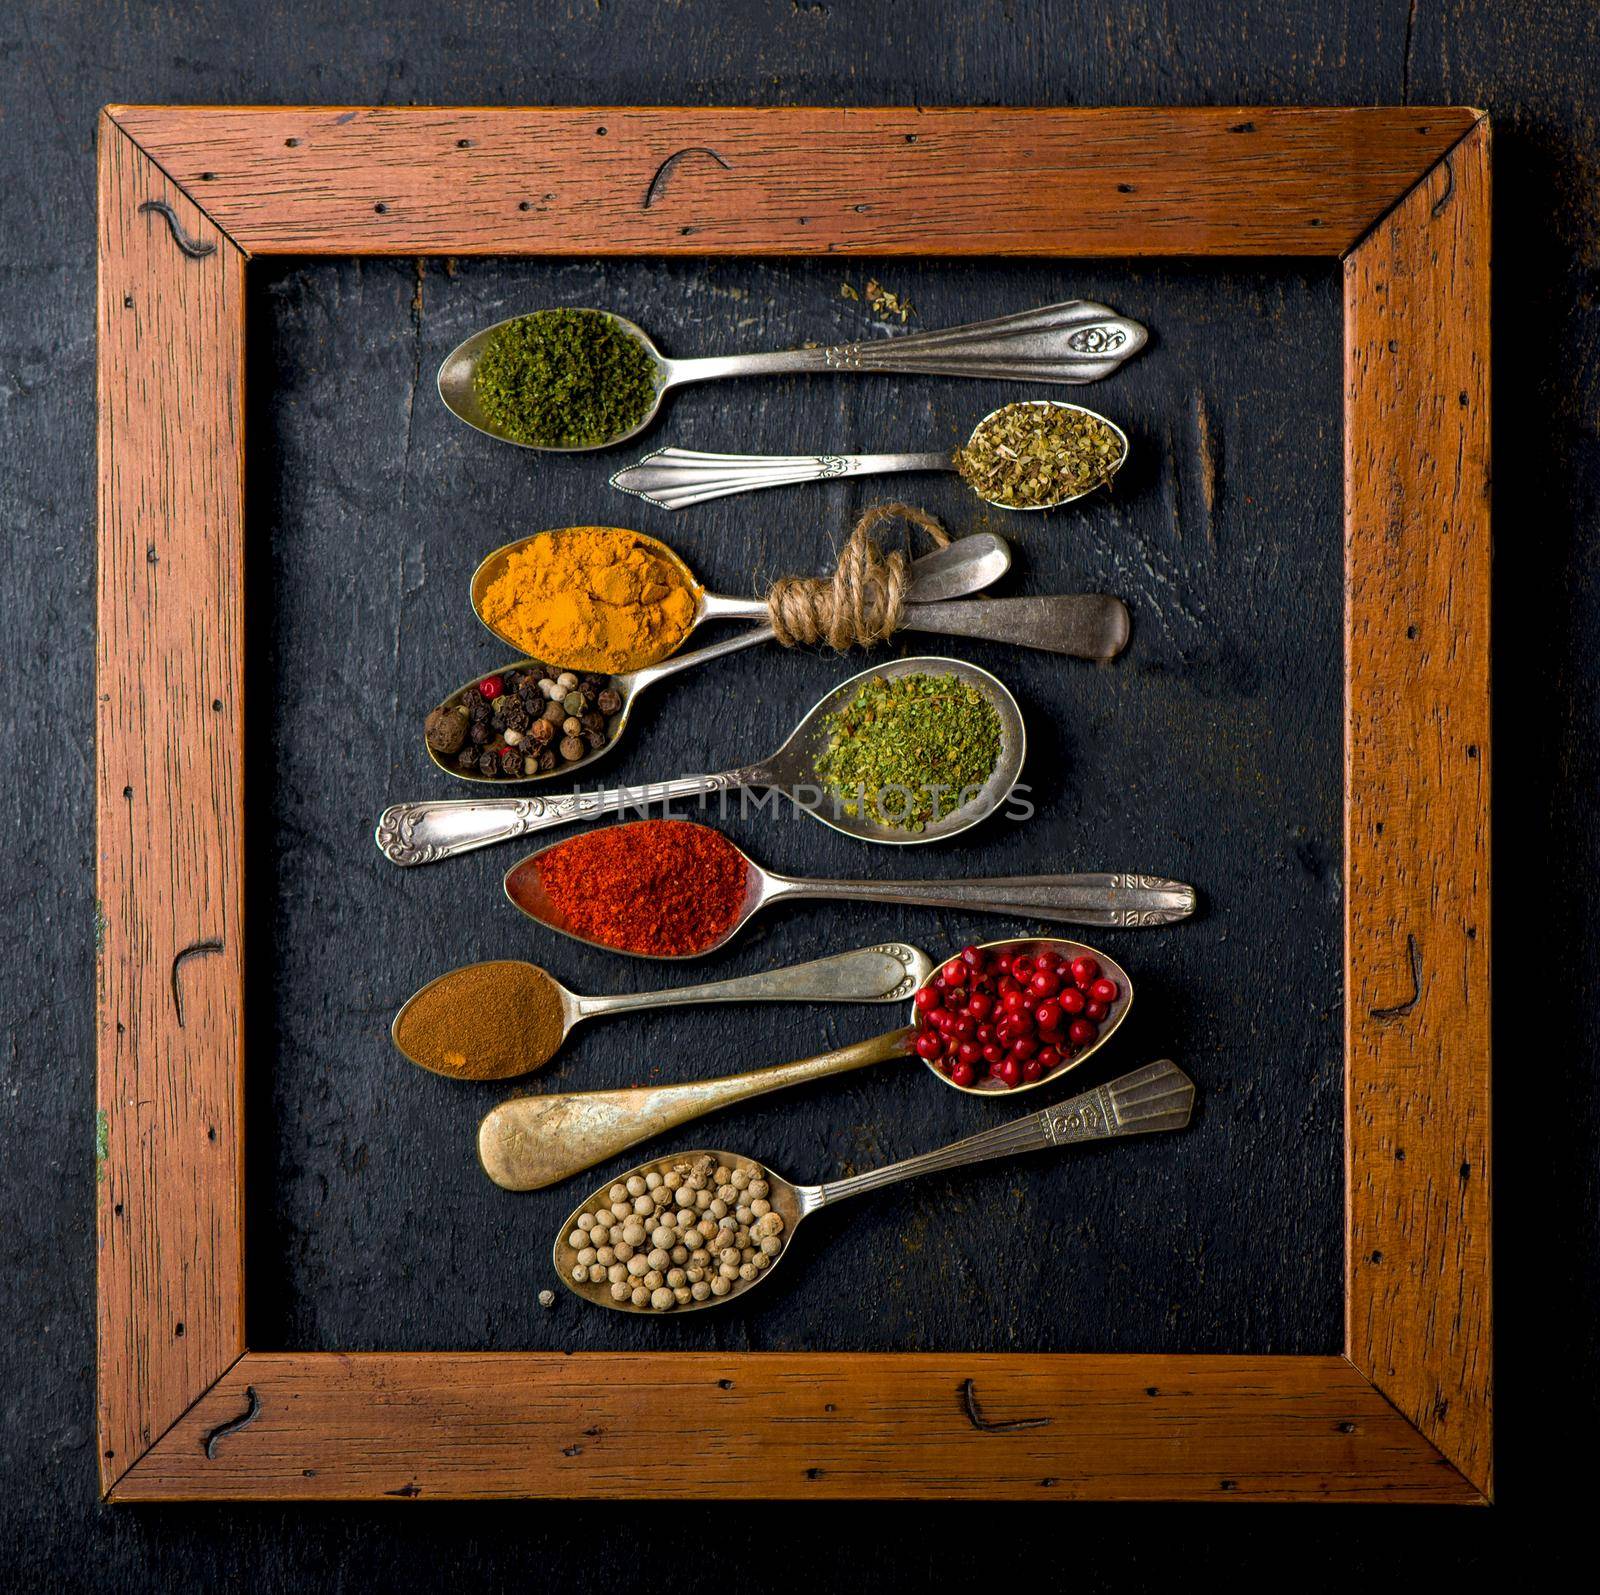 Various spices spoons on table. Top view with copy space